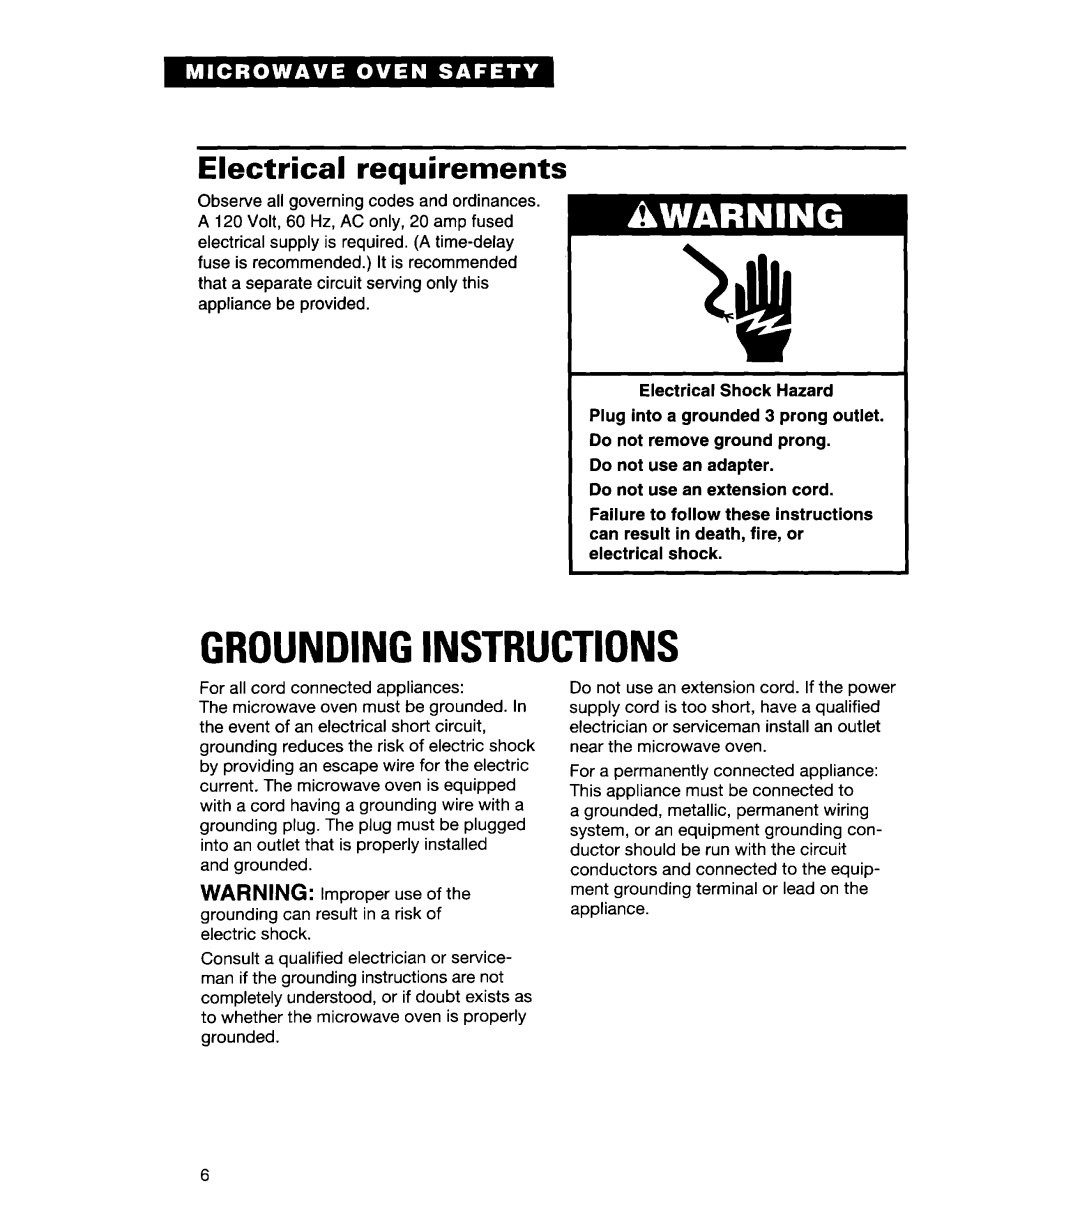 Whirlpool MH7130XE Groundinginstructions, Electrical requirements, Do not use an adapter, Do not use an extension cord 